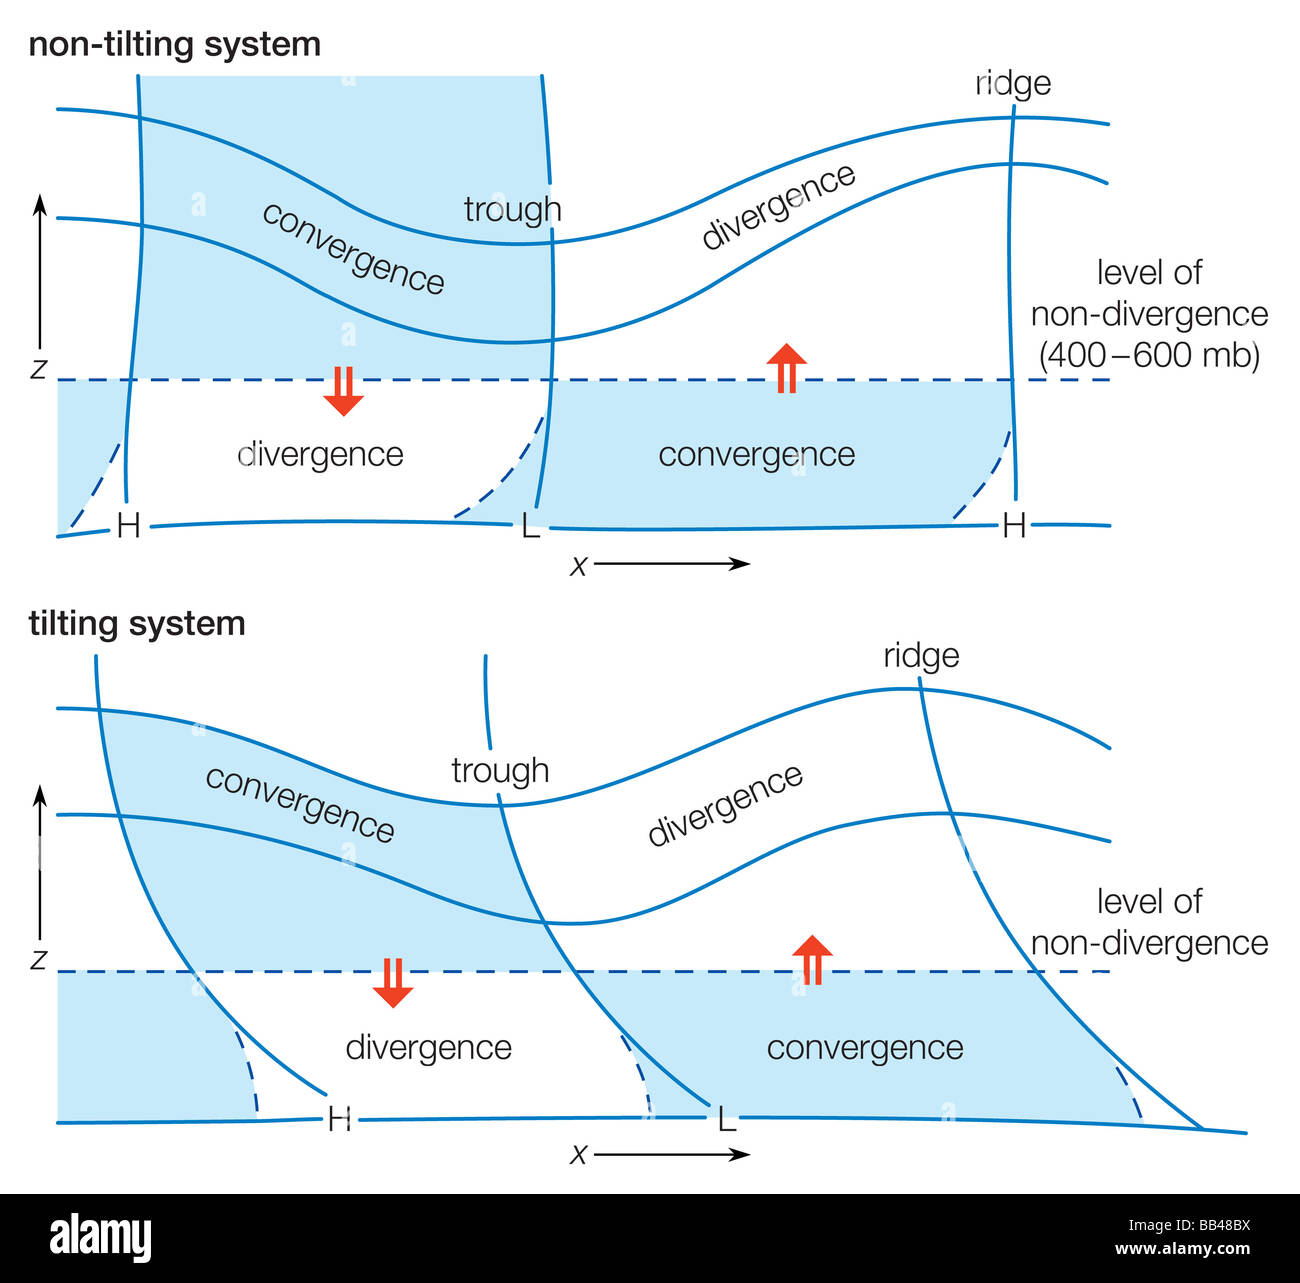 Diagram of a wave system depicting typical divergence and convergence distributions for non-tilting and tilting systems. Stock Photo